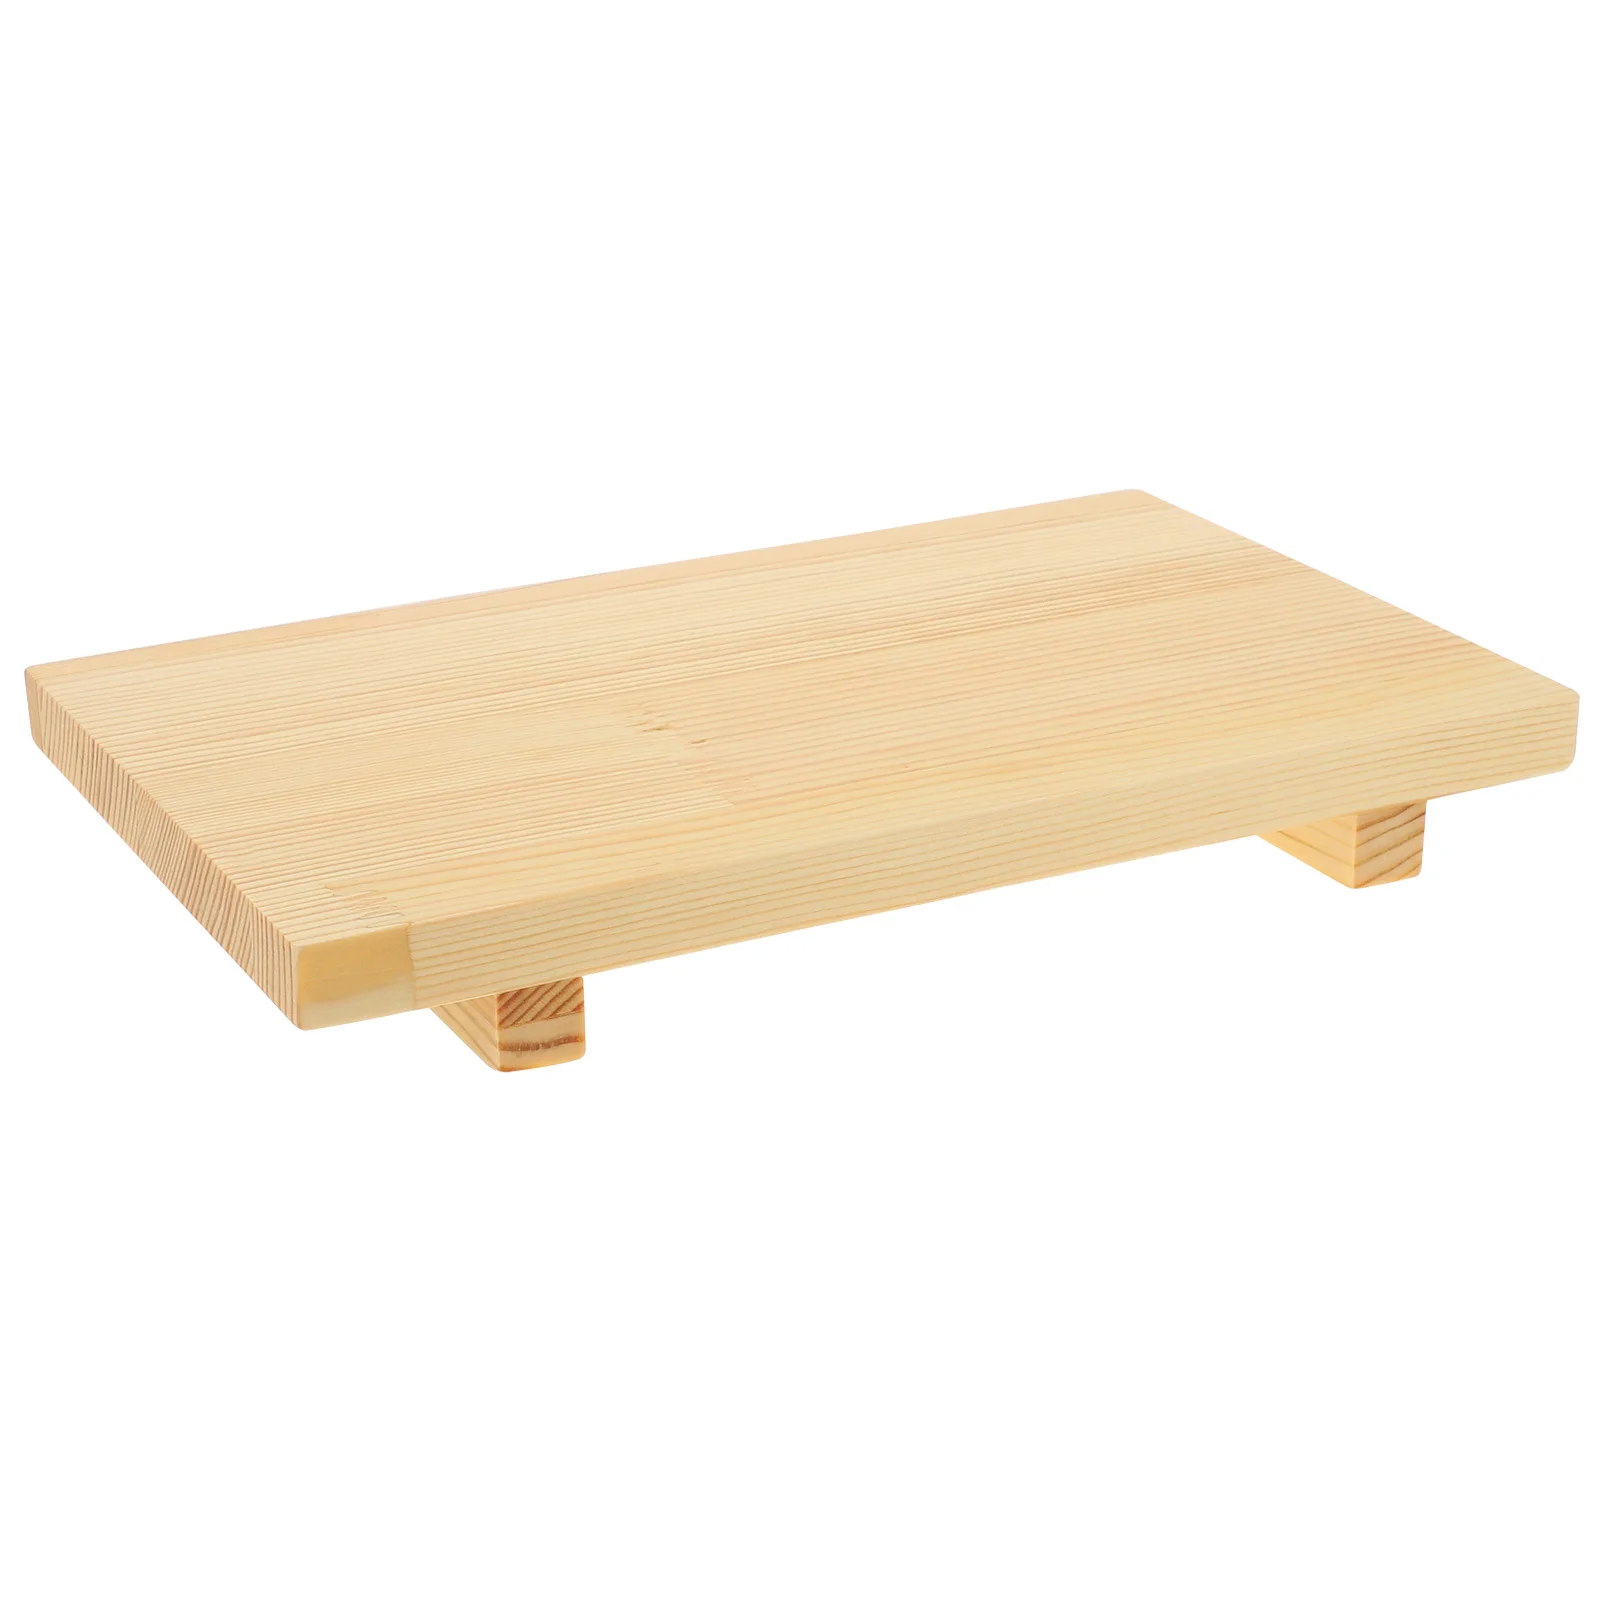 

Sushi Plate Serving Tray Board Platter Plates Sashimi Japanesegeta Wood Cheese Woodenboat Holder Party Desserts Tableware